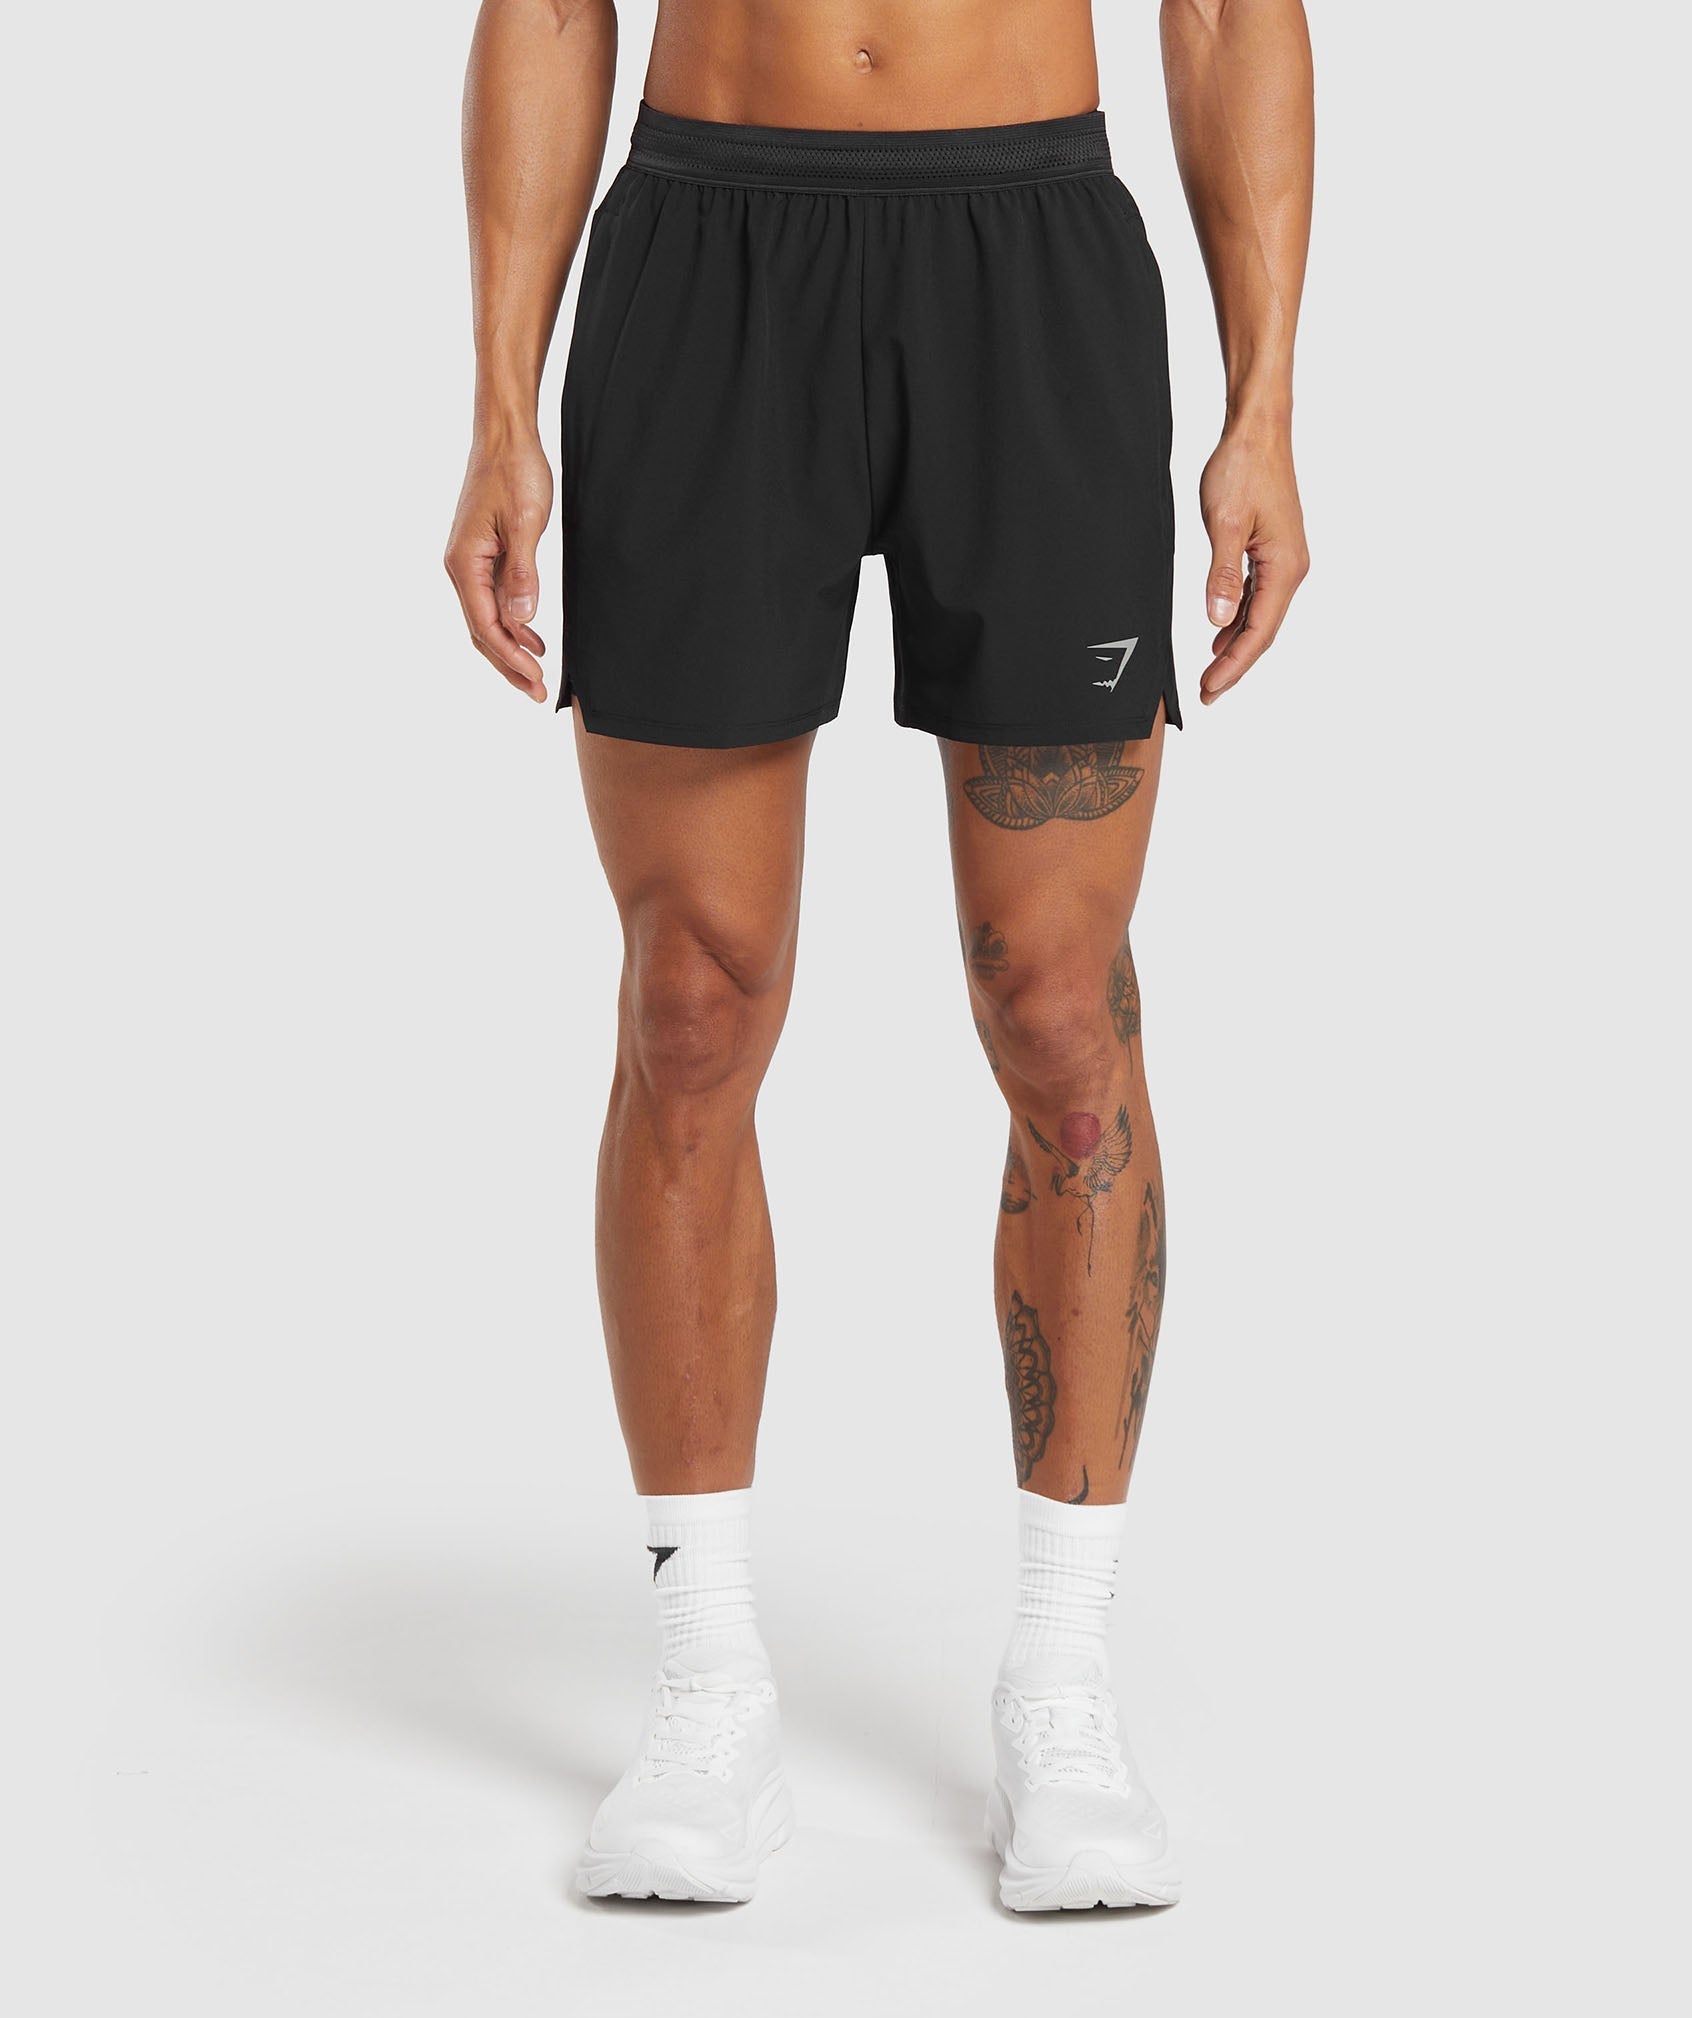 Speed 5" Shorts in Black - view 1